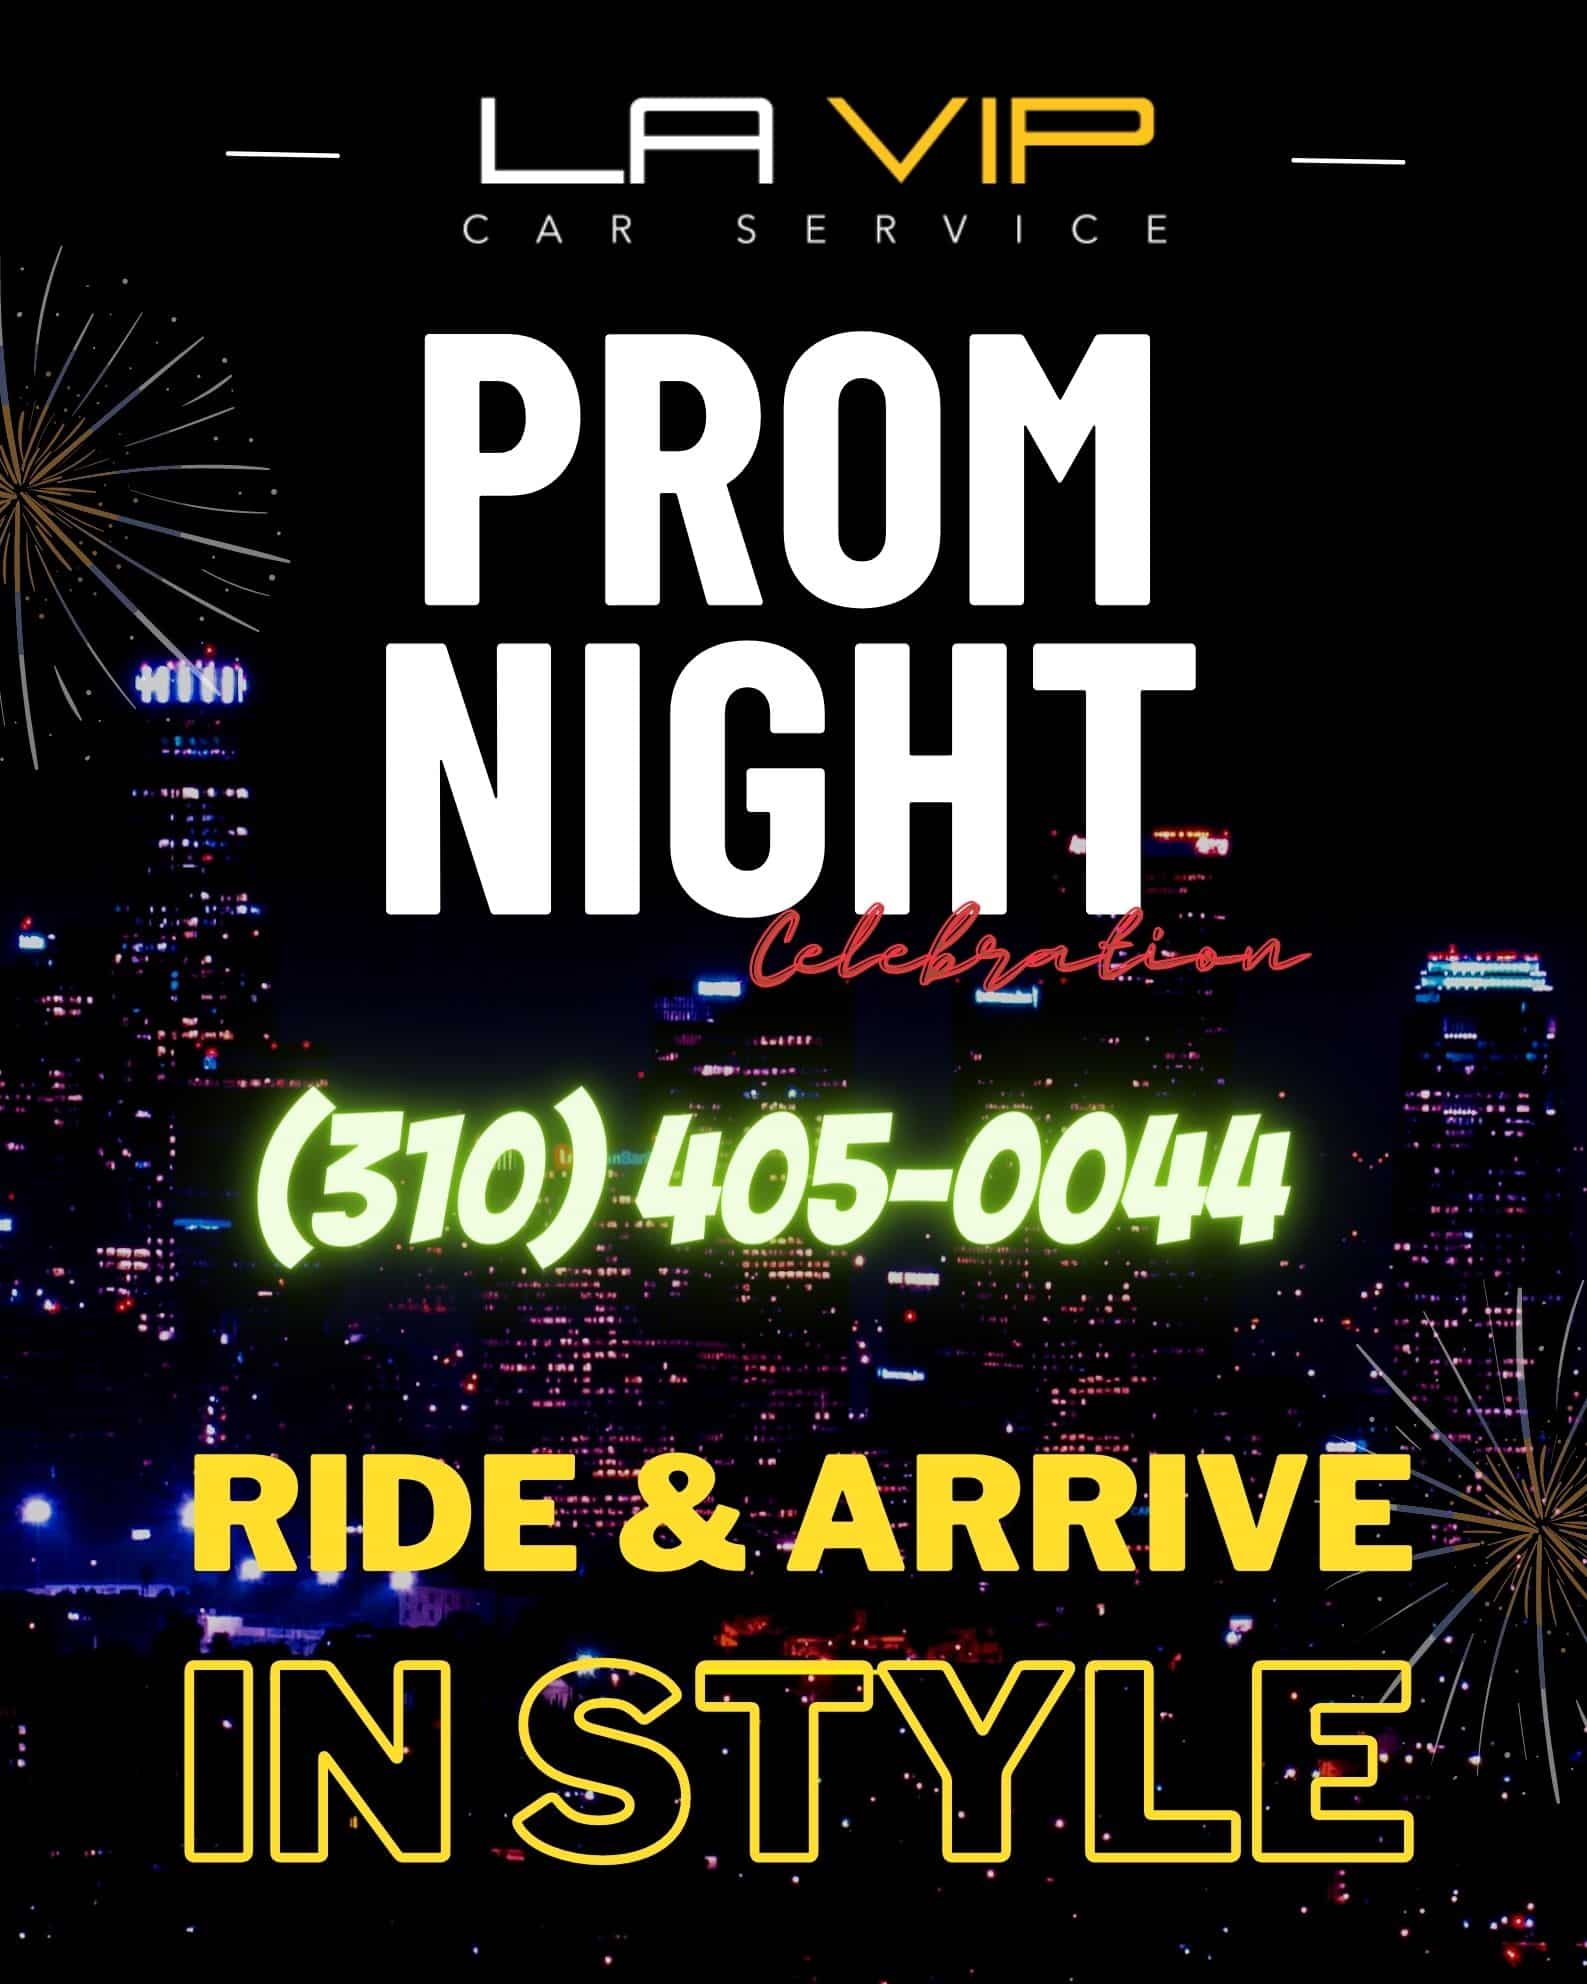 Prom Luxury Car Services